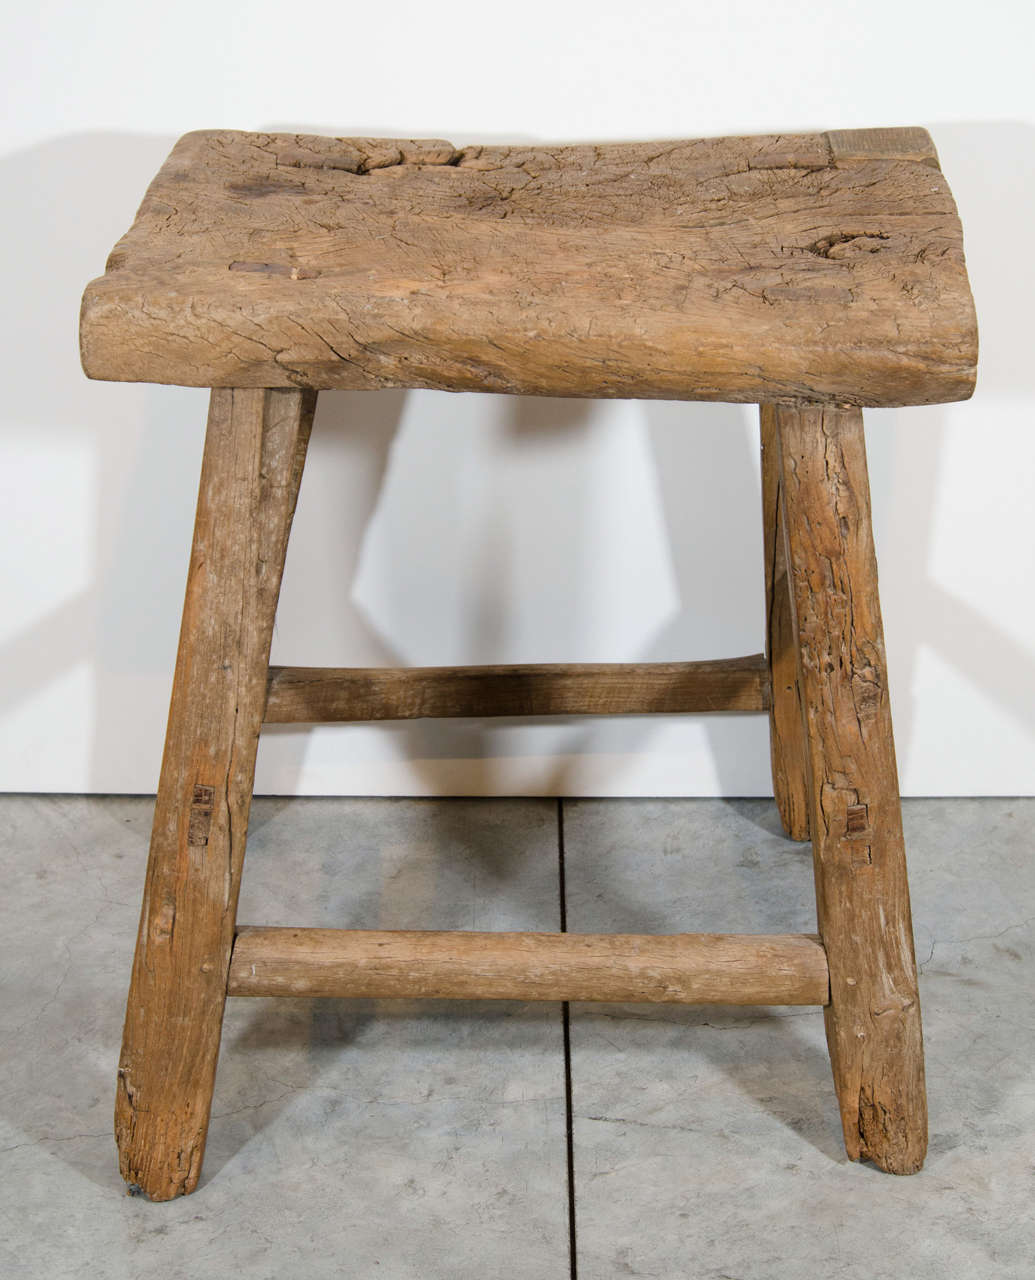 A rustic, country stool from rural China. From Shanxi Province, c. 1900.
S497